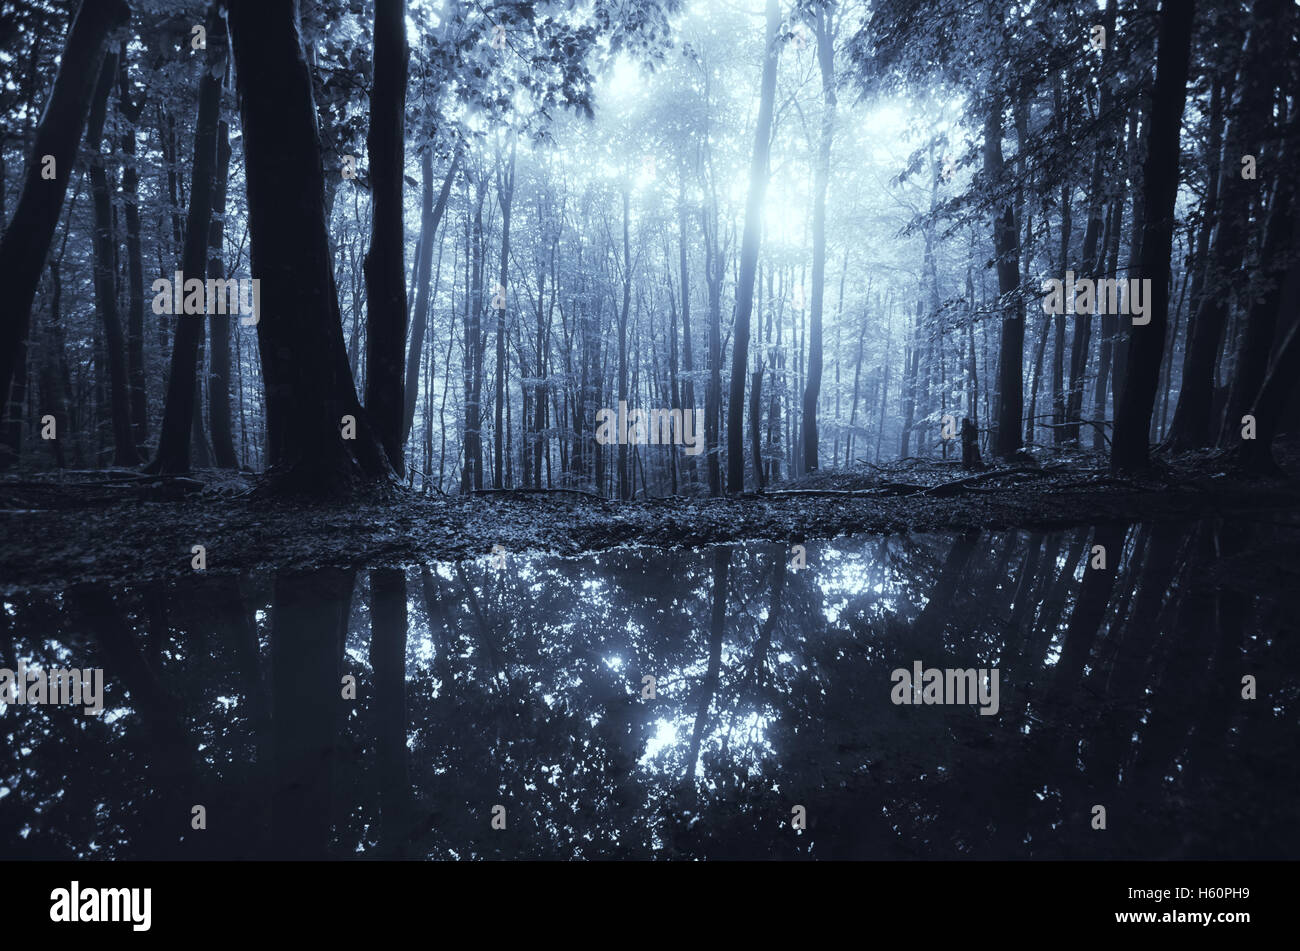 Dark forest reflecting in water Stock Photo